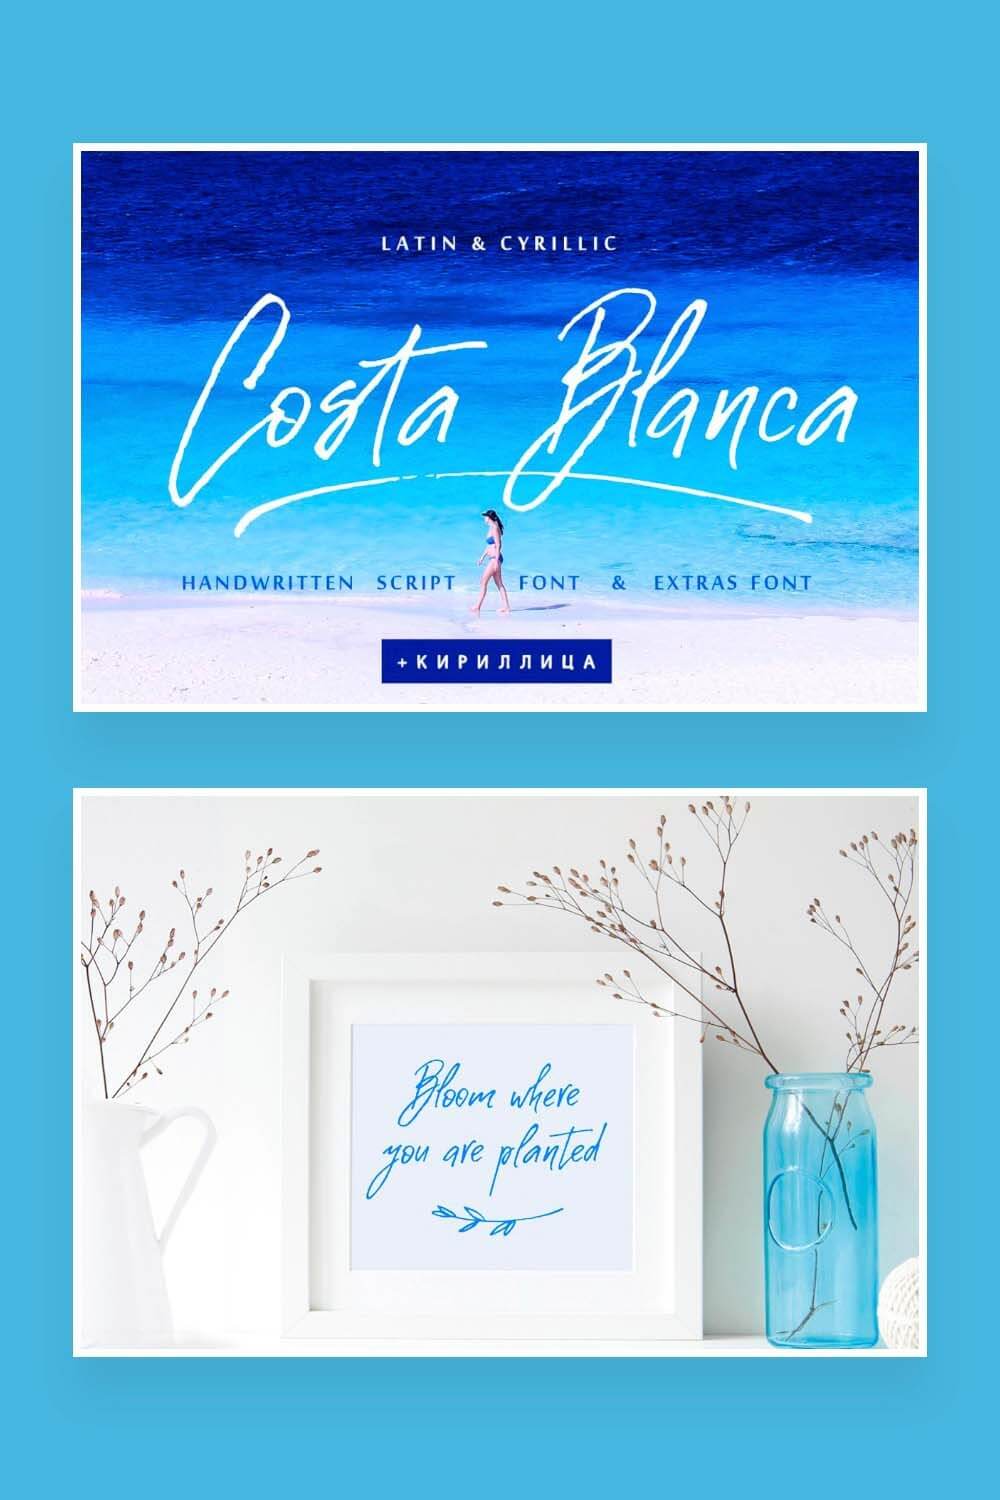 Latin & Cyrillic, Costa Blanca, Handwritten script font & Extras font. Bloom where you are planted.